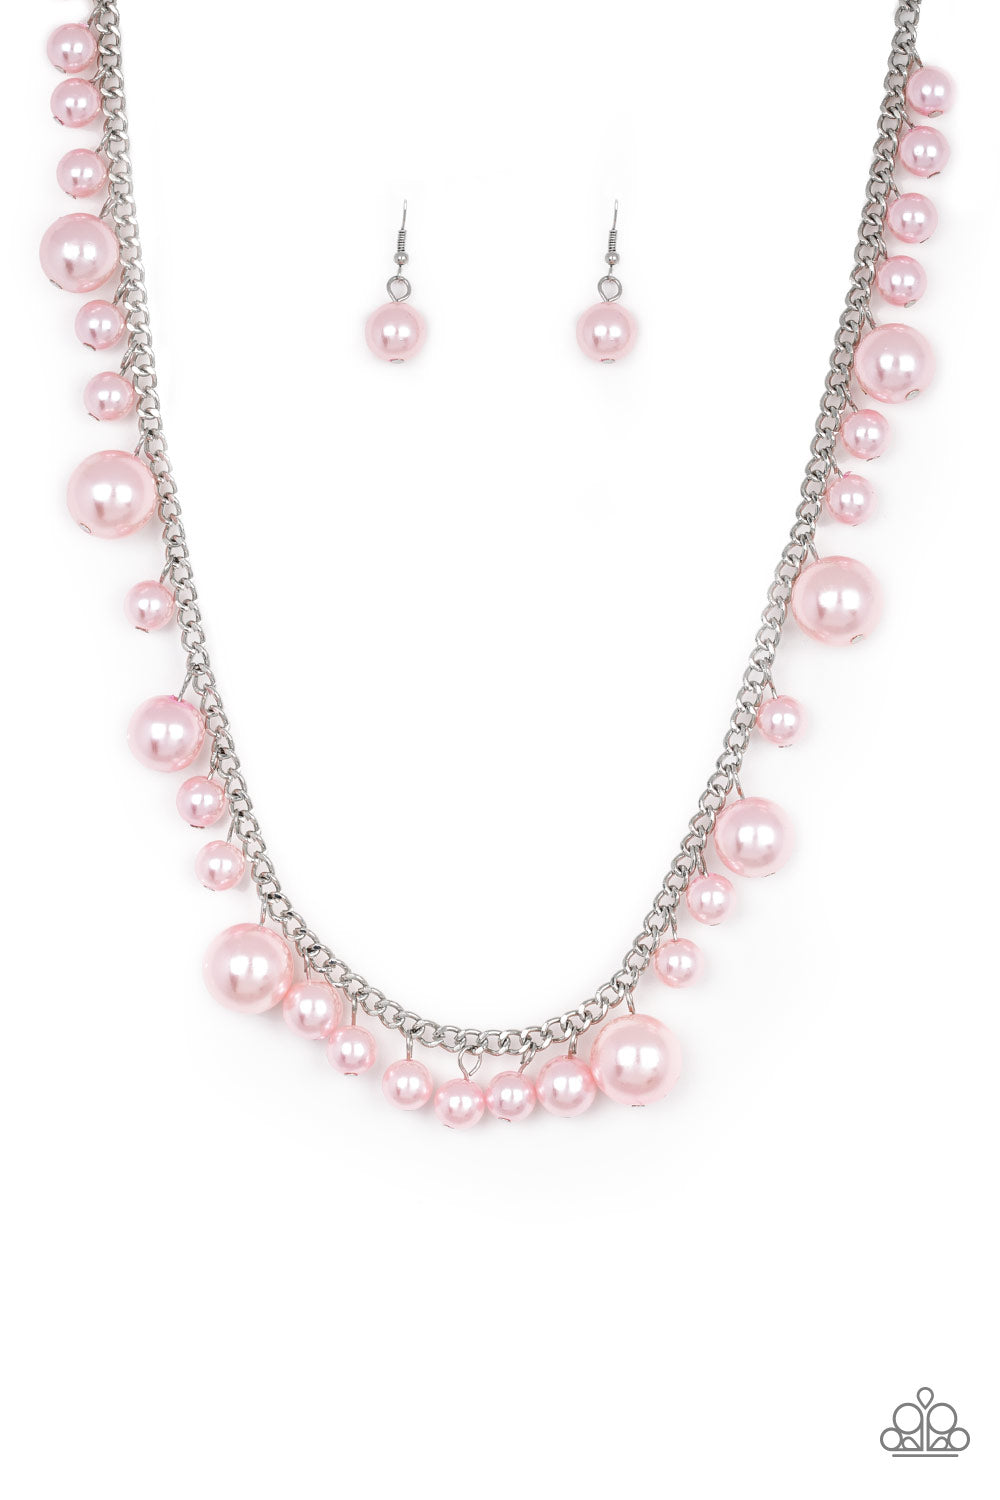 There's Always Room at the Top Necklace__Pink